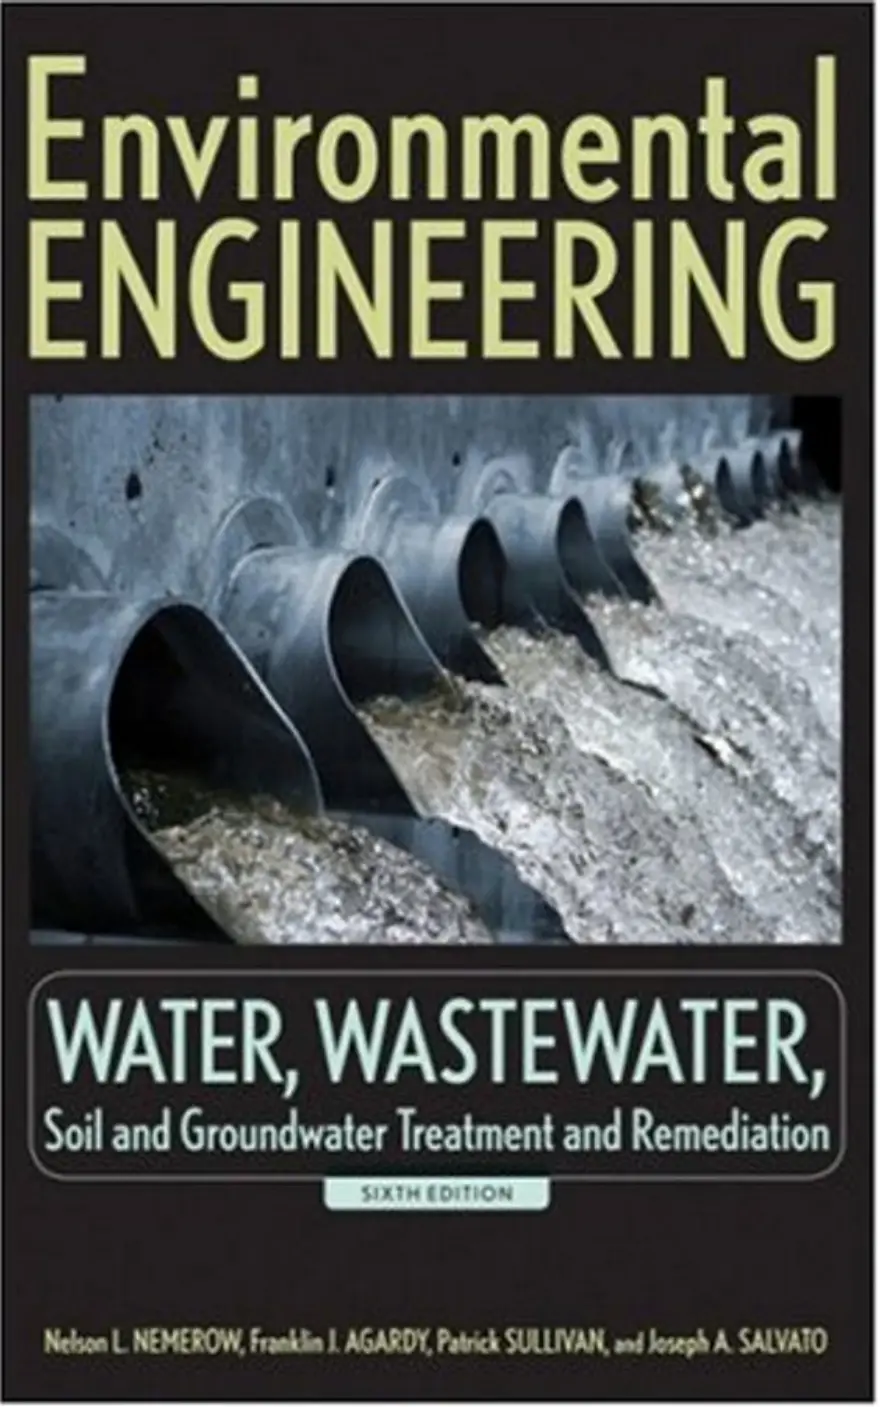 Environmental Engineering: Water, Wastewater, Soil And Groundwater Treatment And Remediation